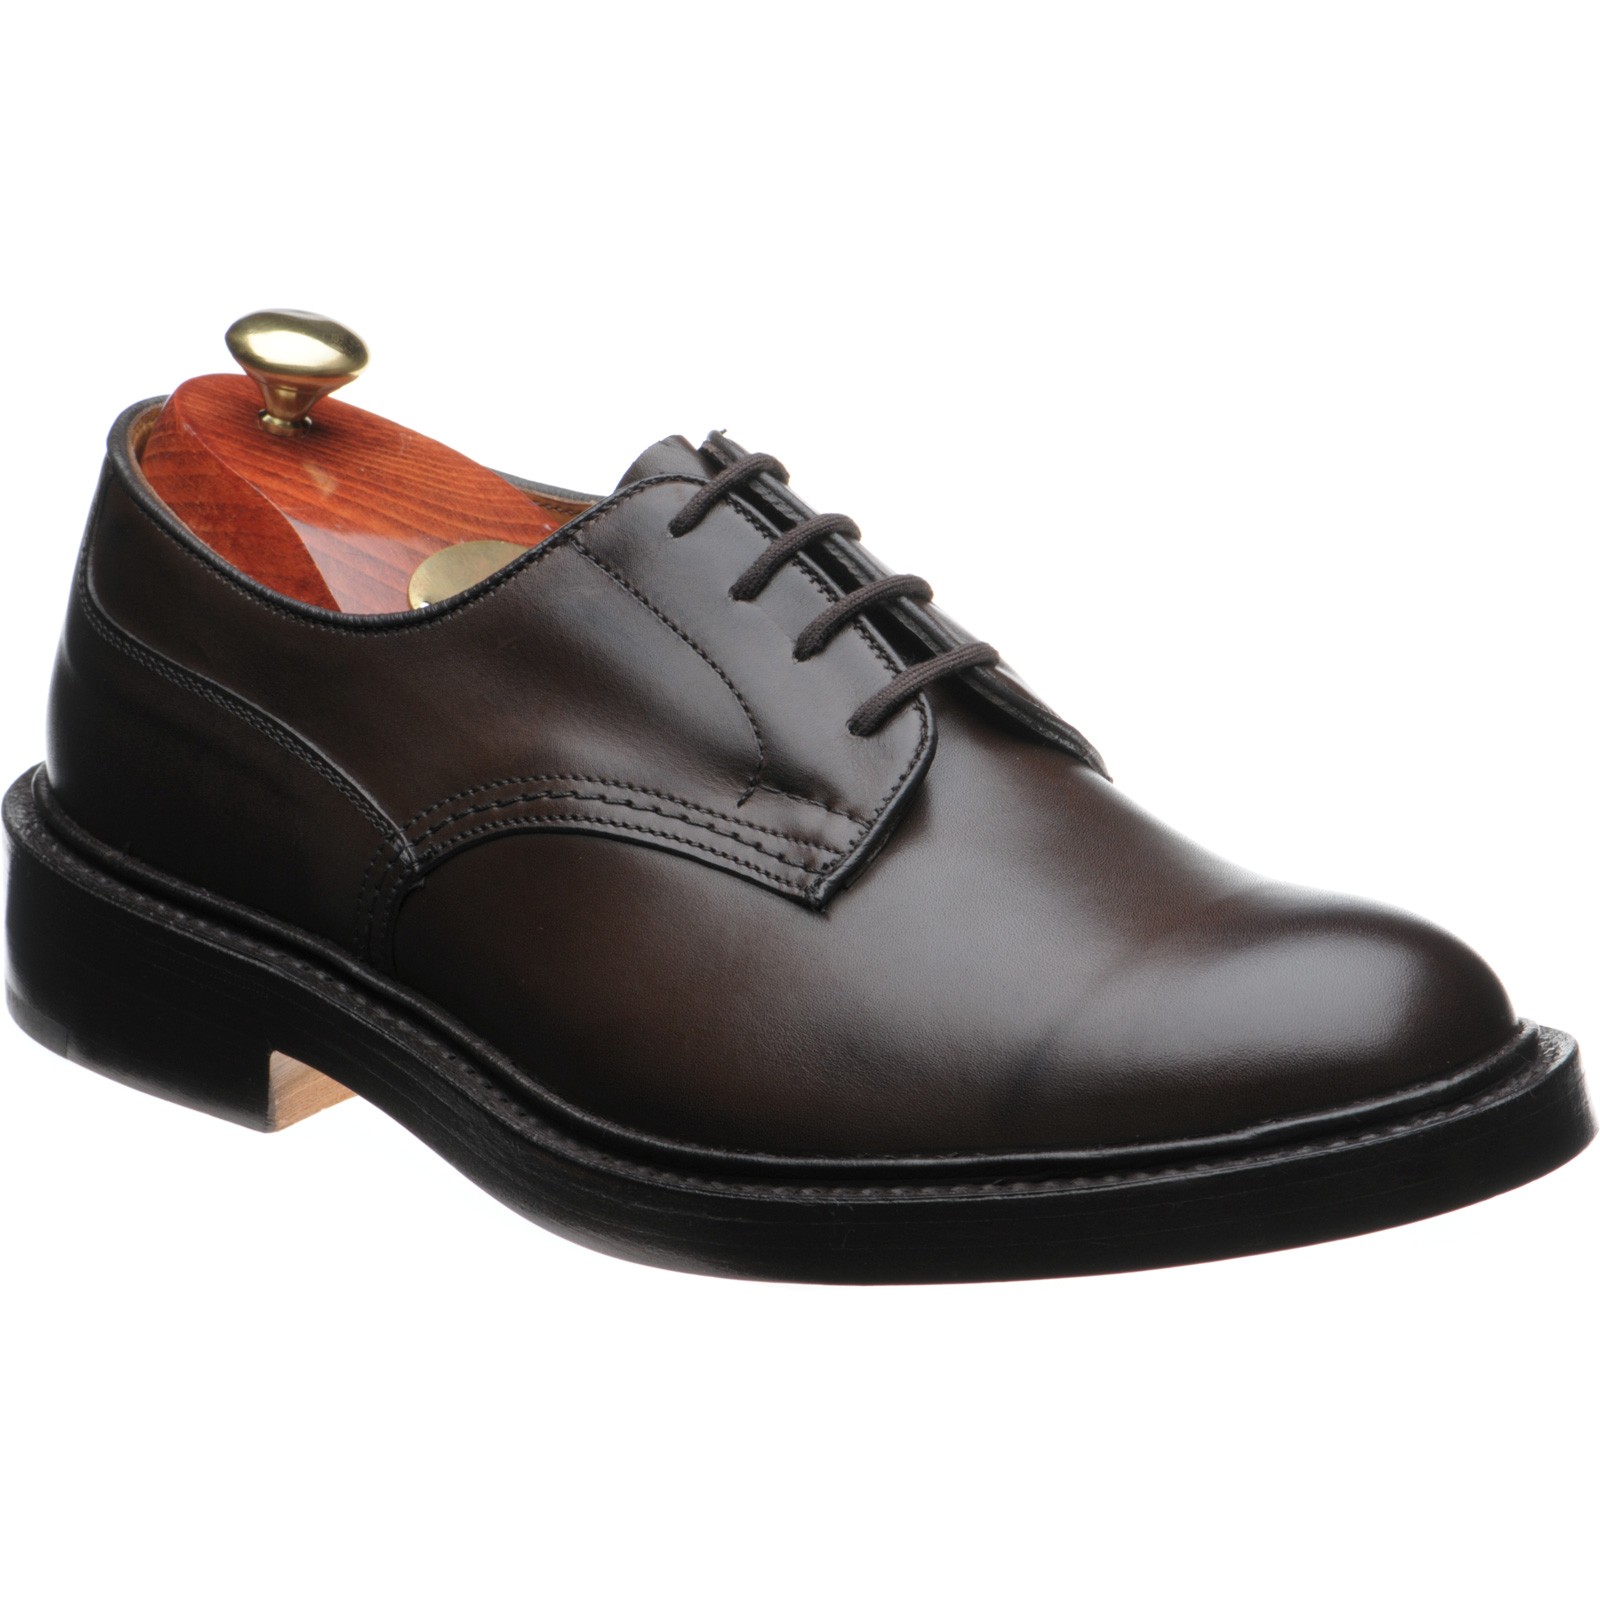 Trickers shoes | Trickers Country Collection | Woodstock Derby shoes in ...